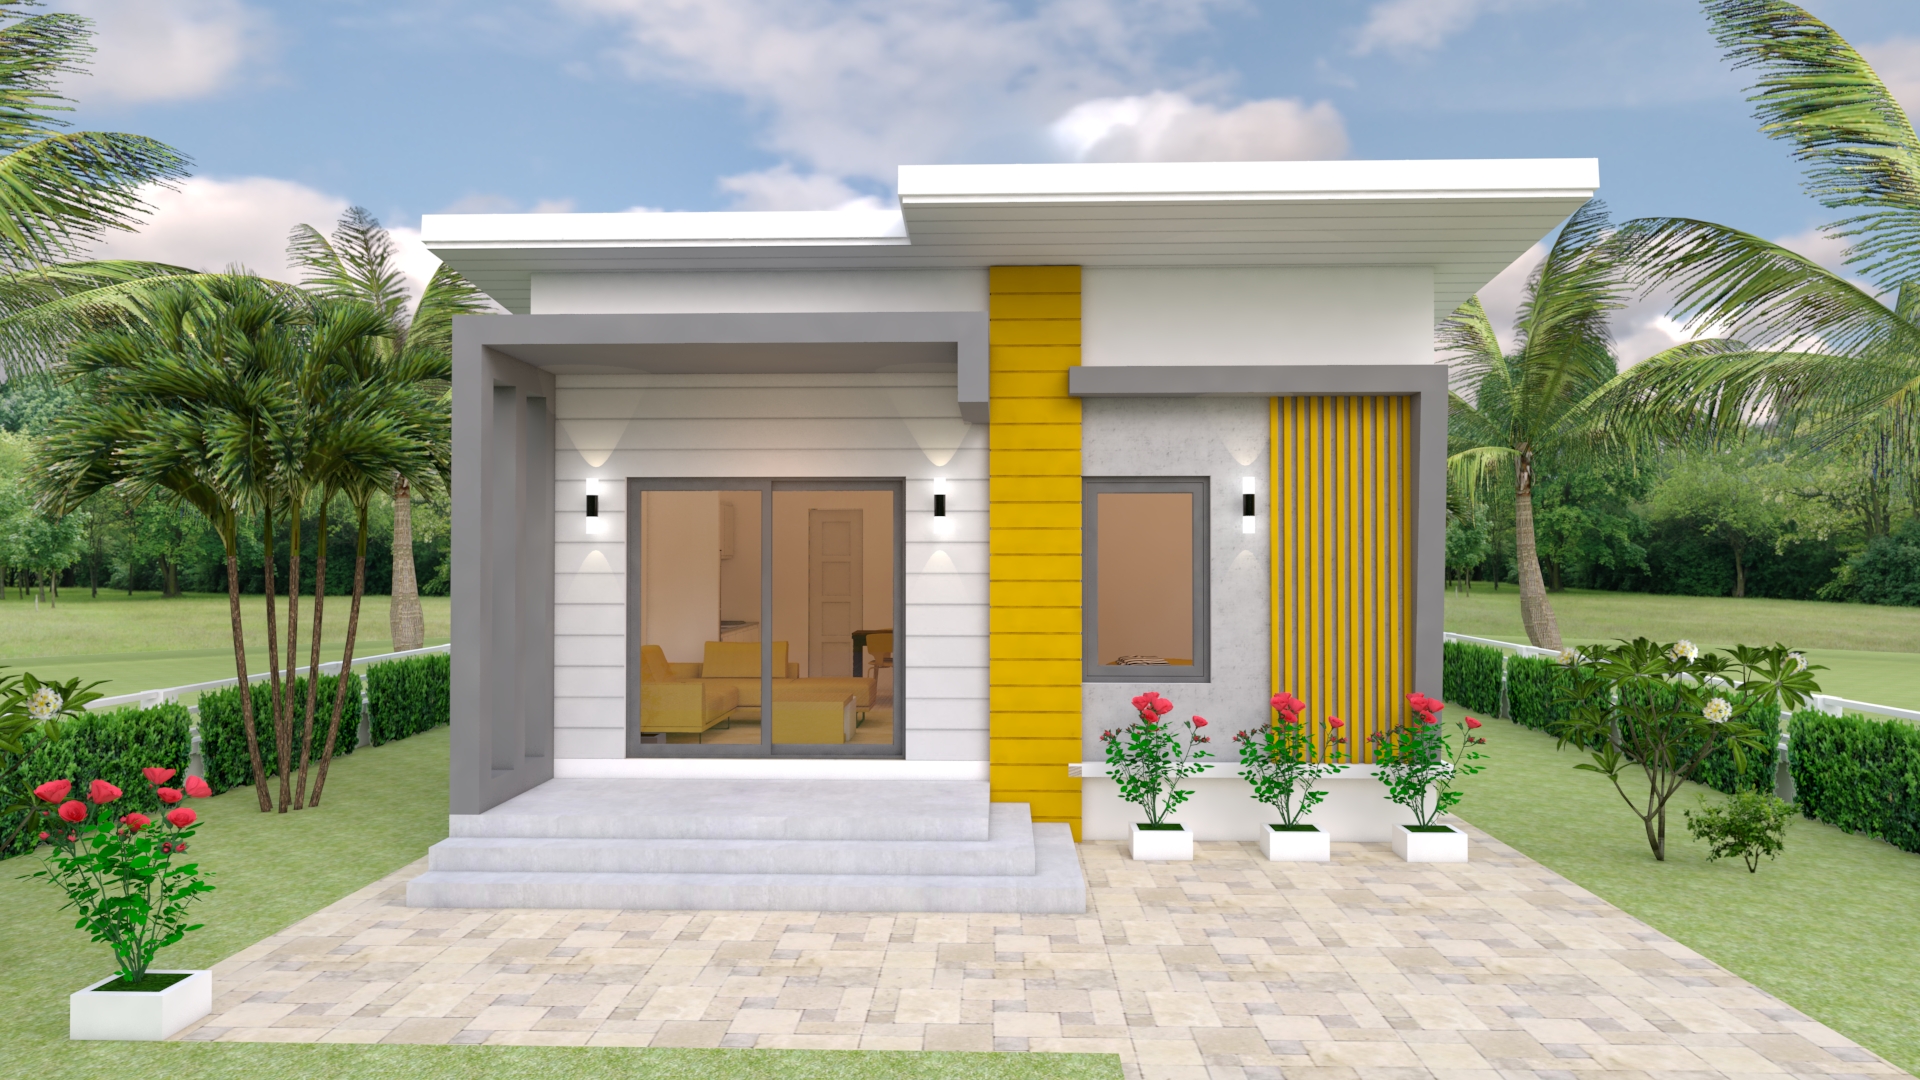 House Design 3d 7x12 Meter 23x40 Feet 2 Bedrooms Shed Roof